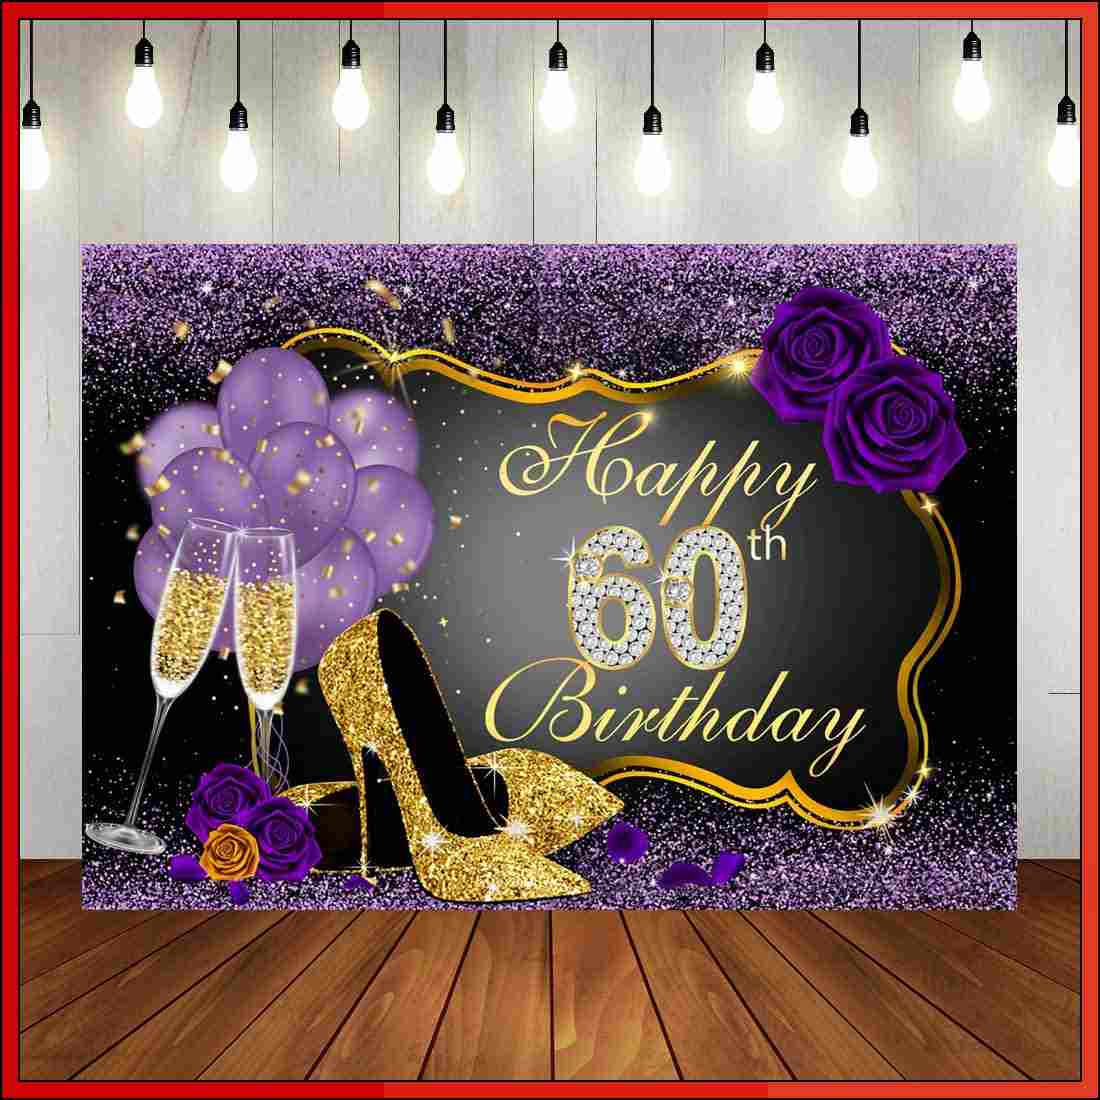 60th birthday images for her
